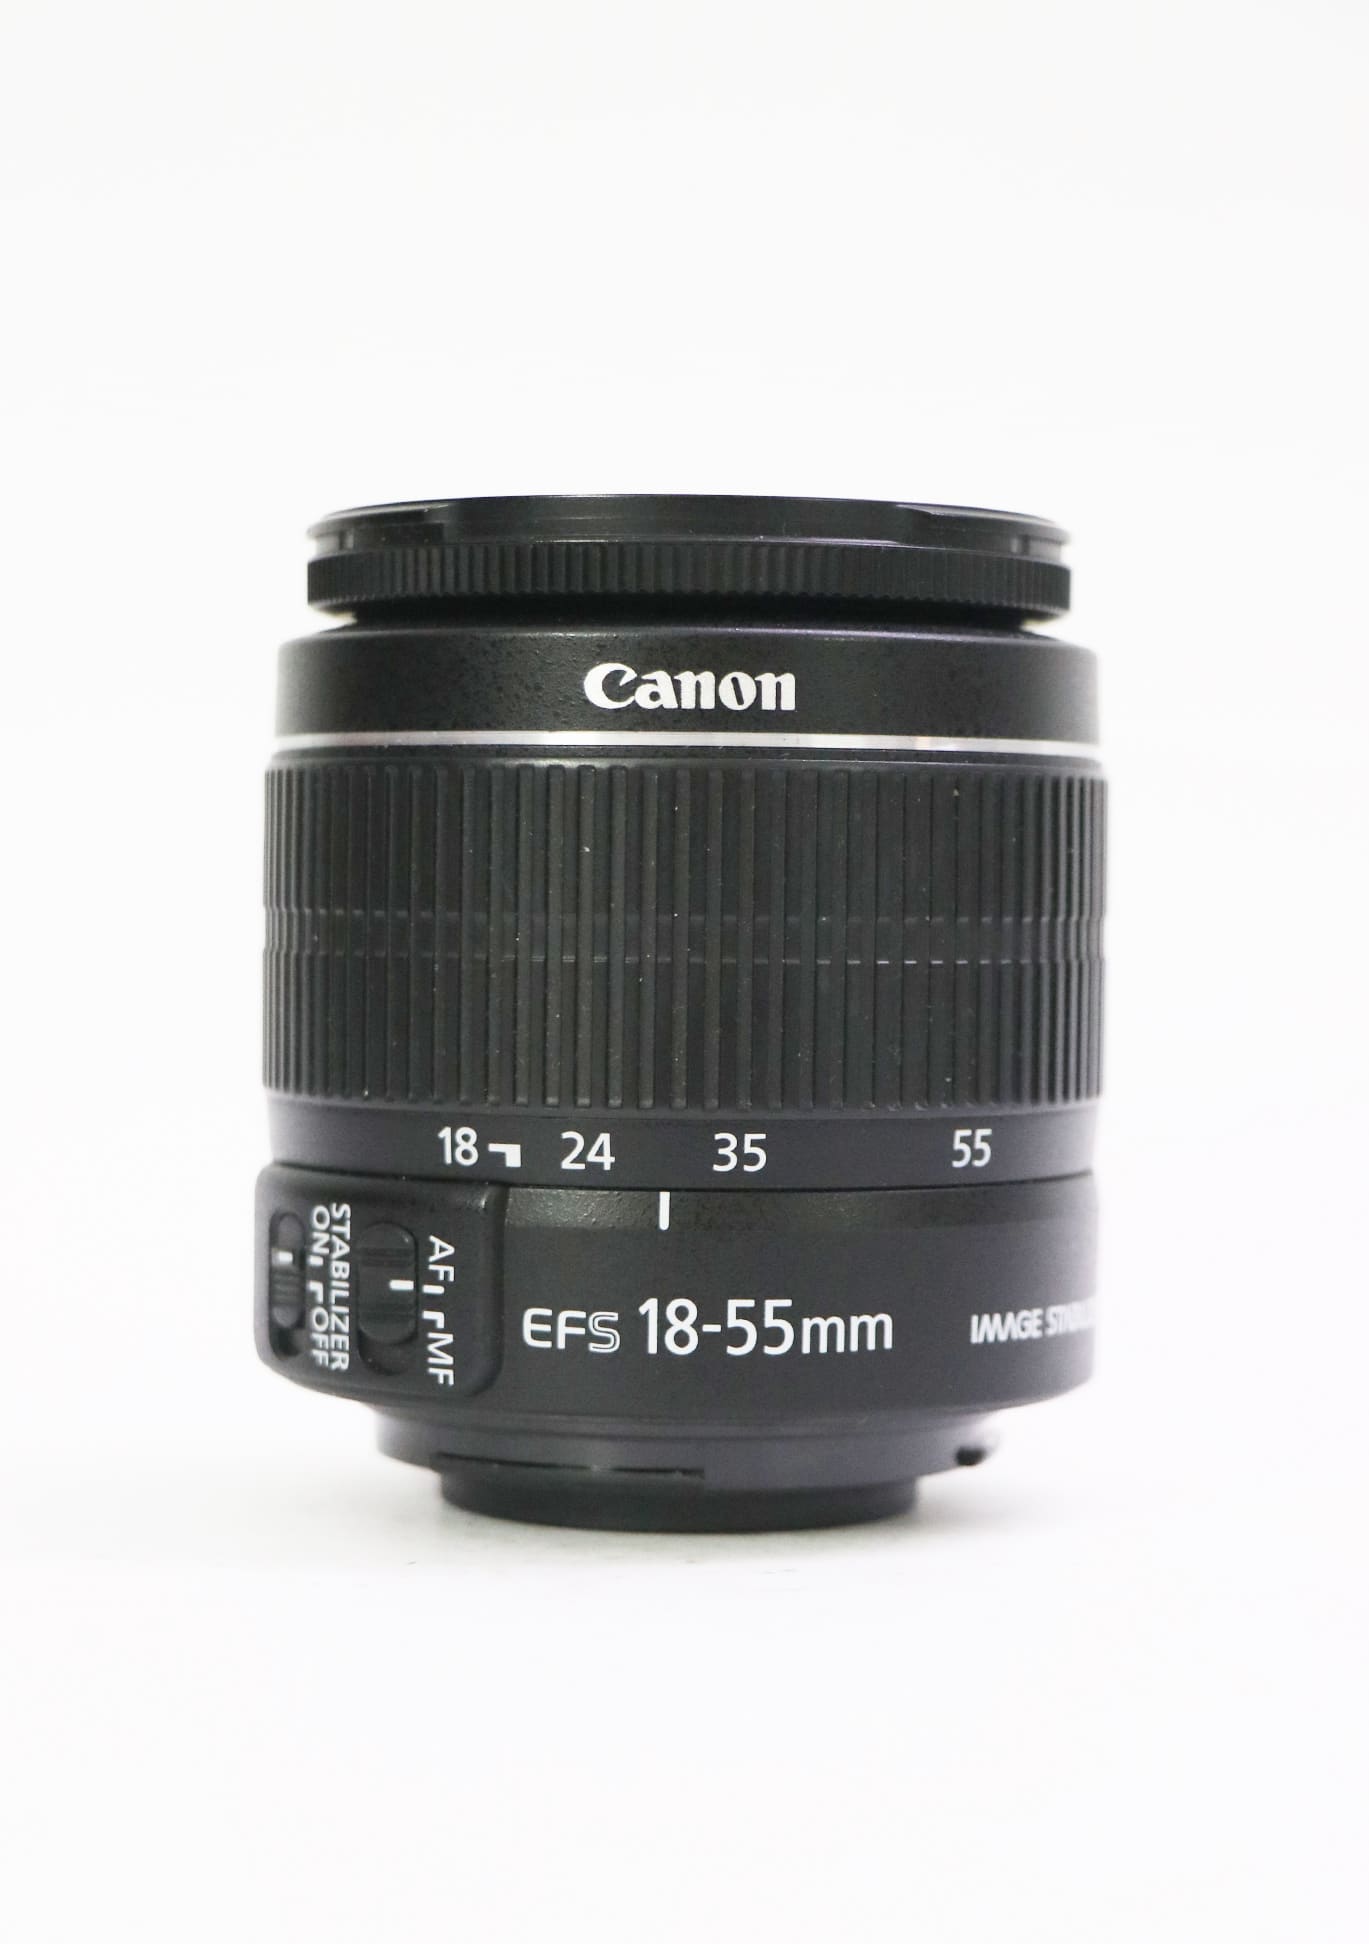 Used Canon 200D with 18 55mm Lens